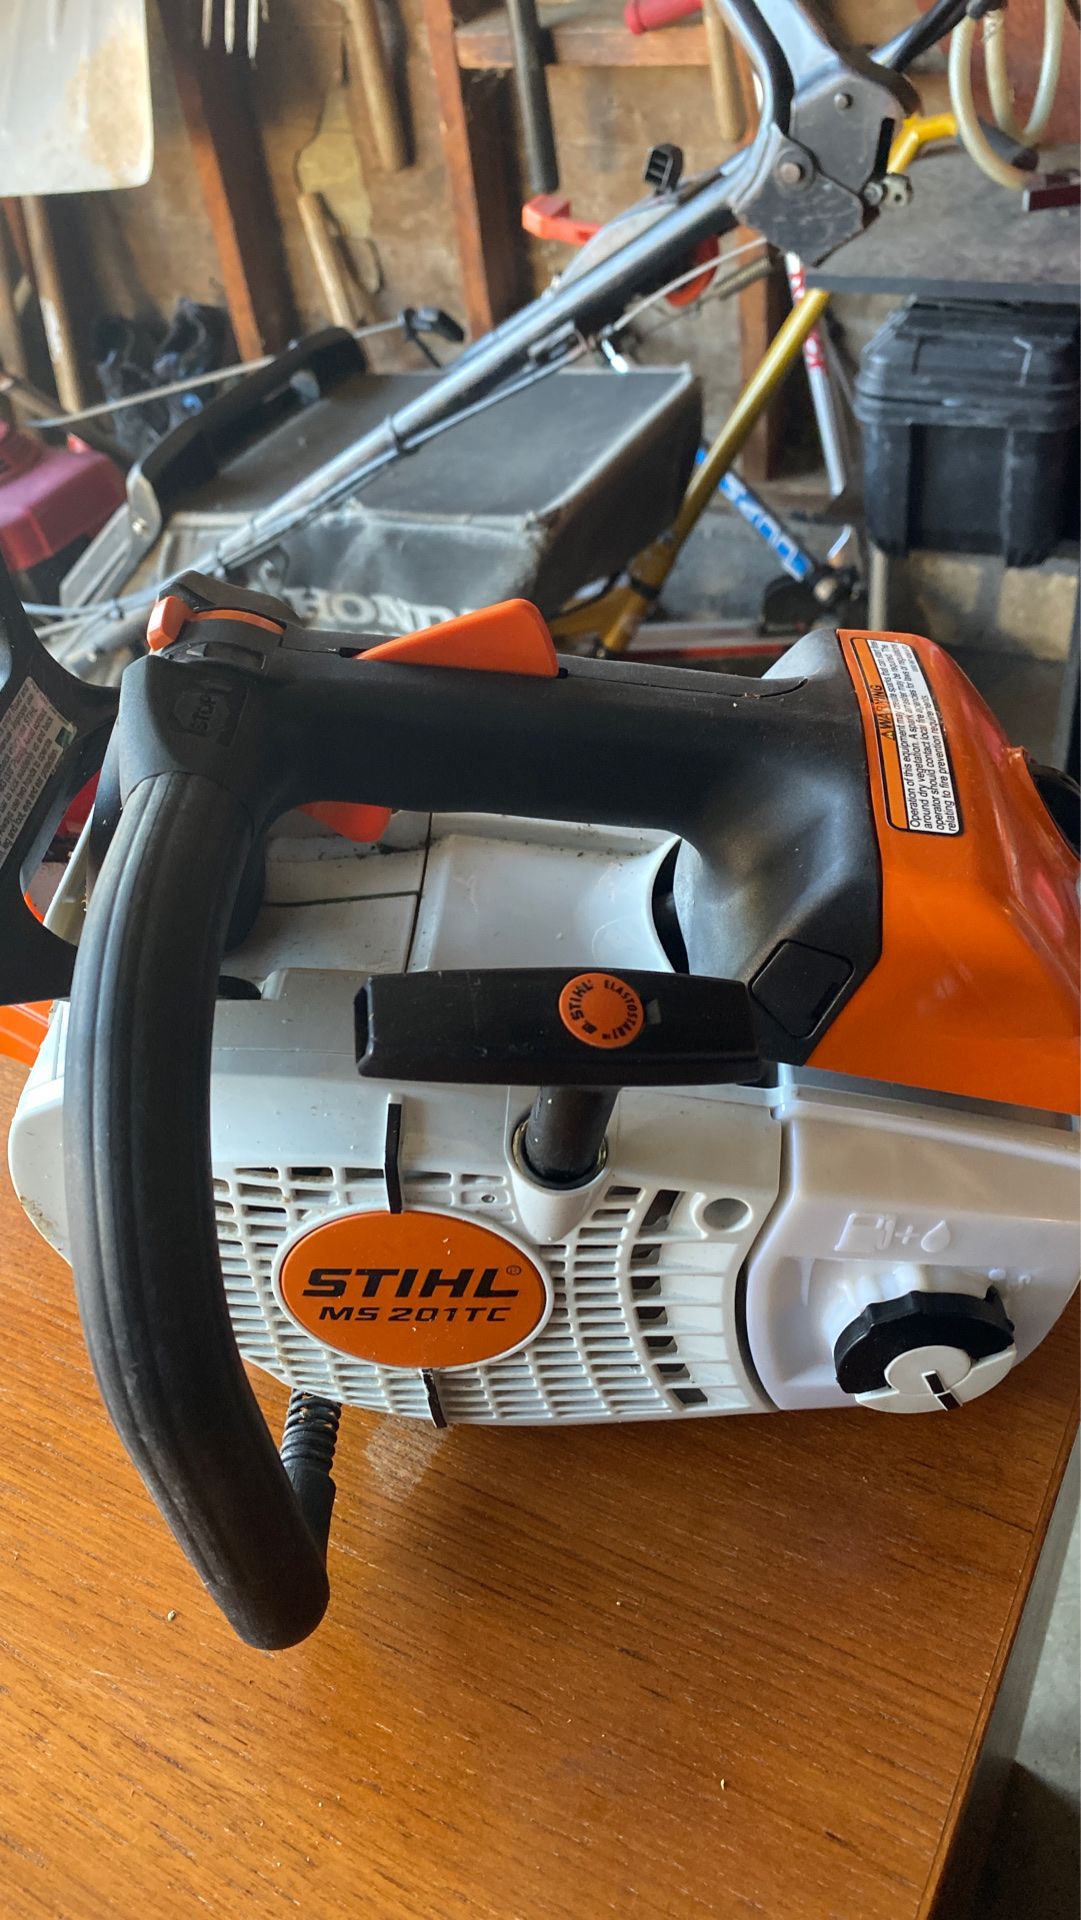 Sthil chainsaw